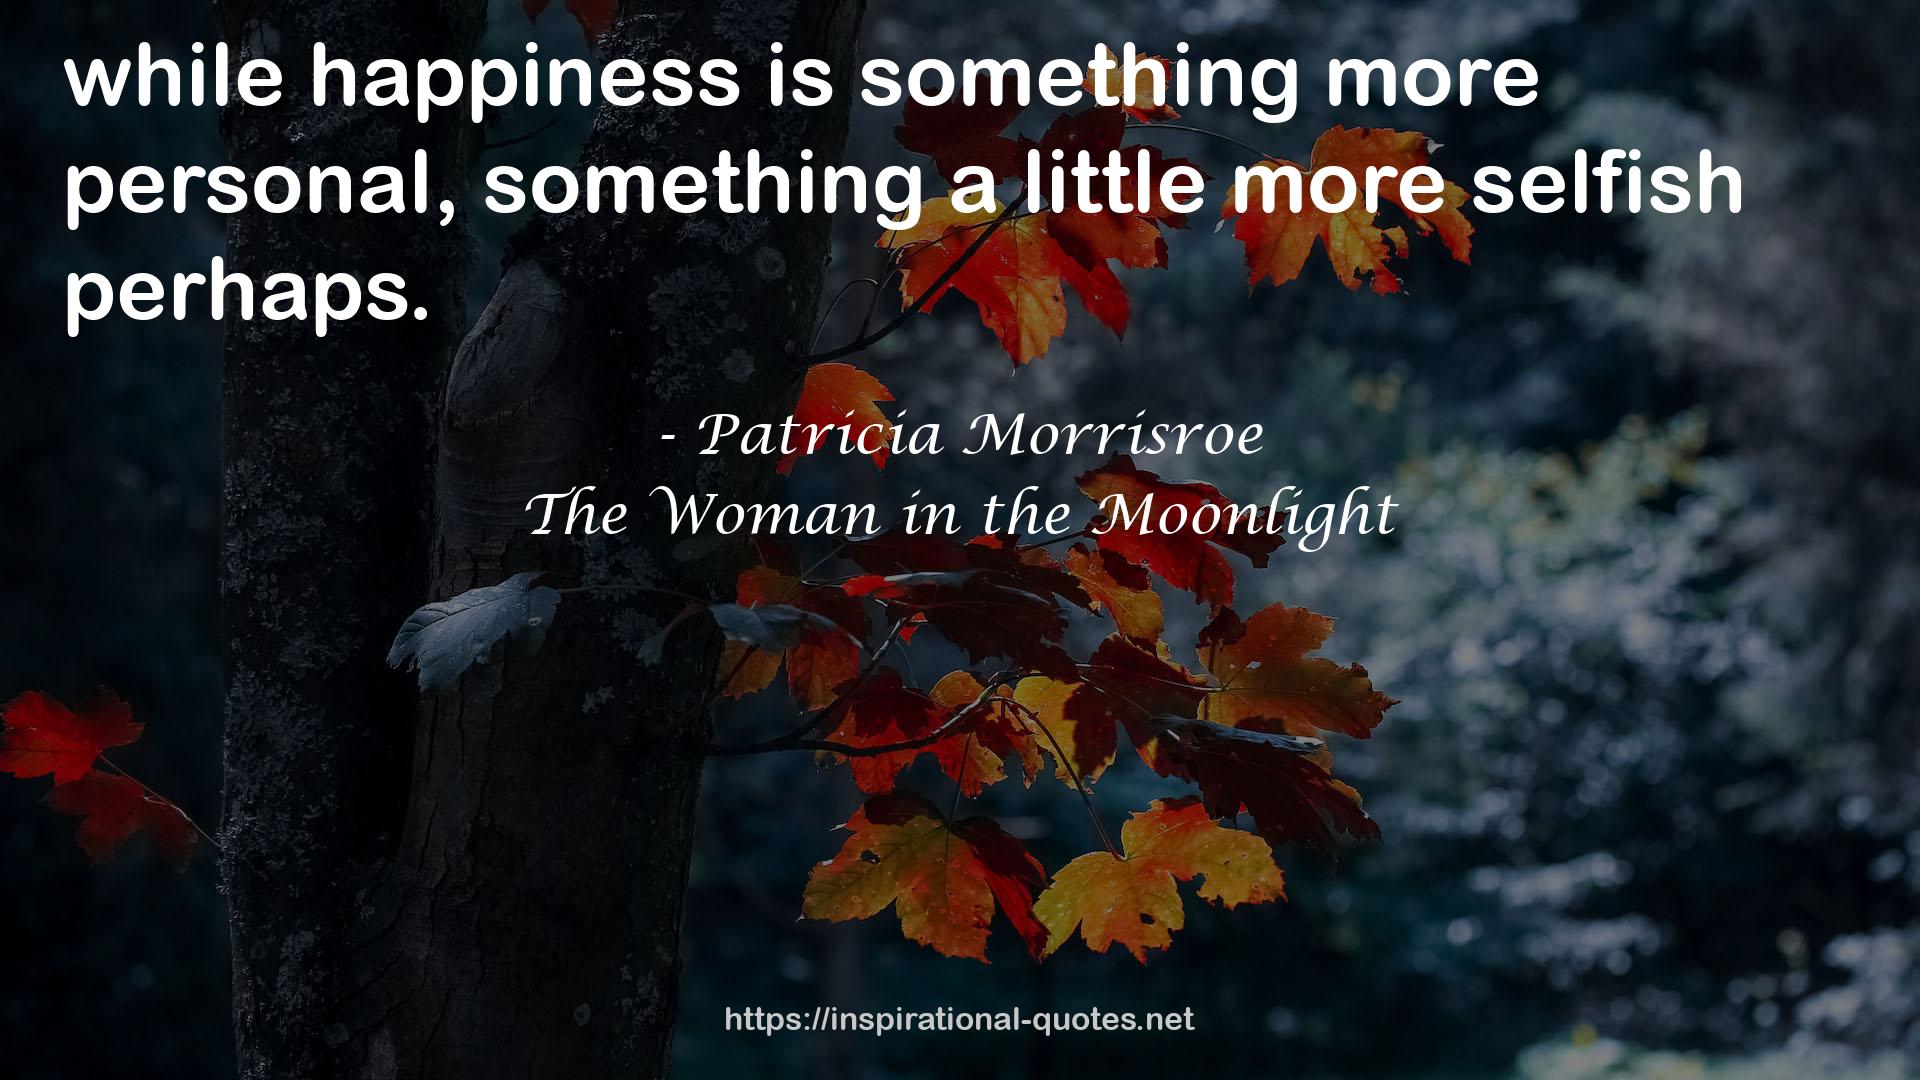 The Woman in the Moonlight QUOTES